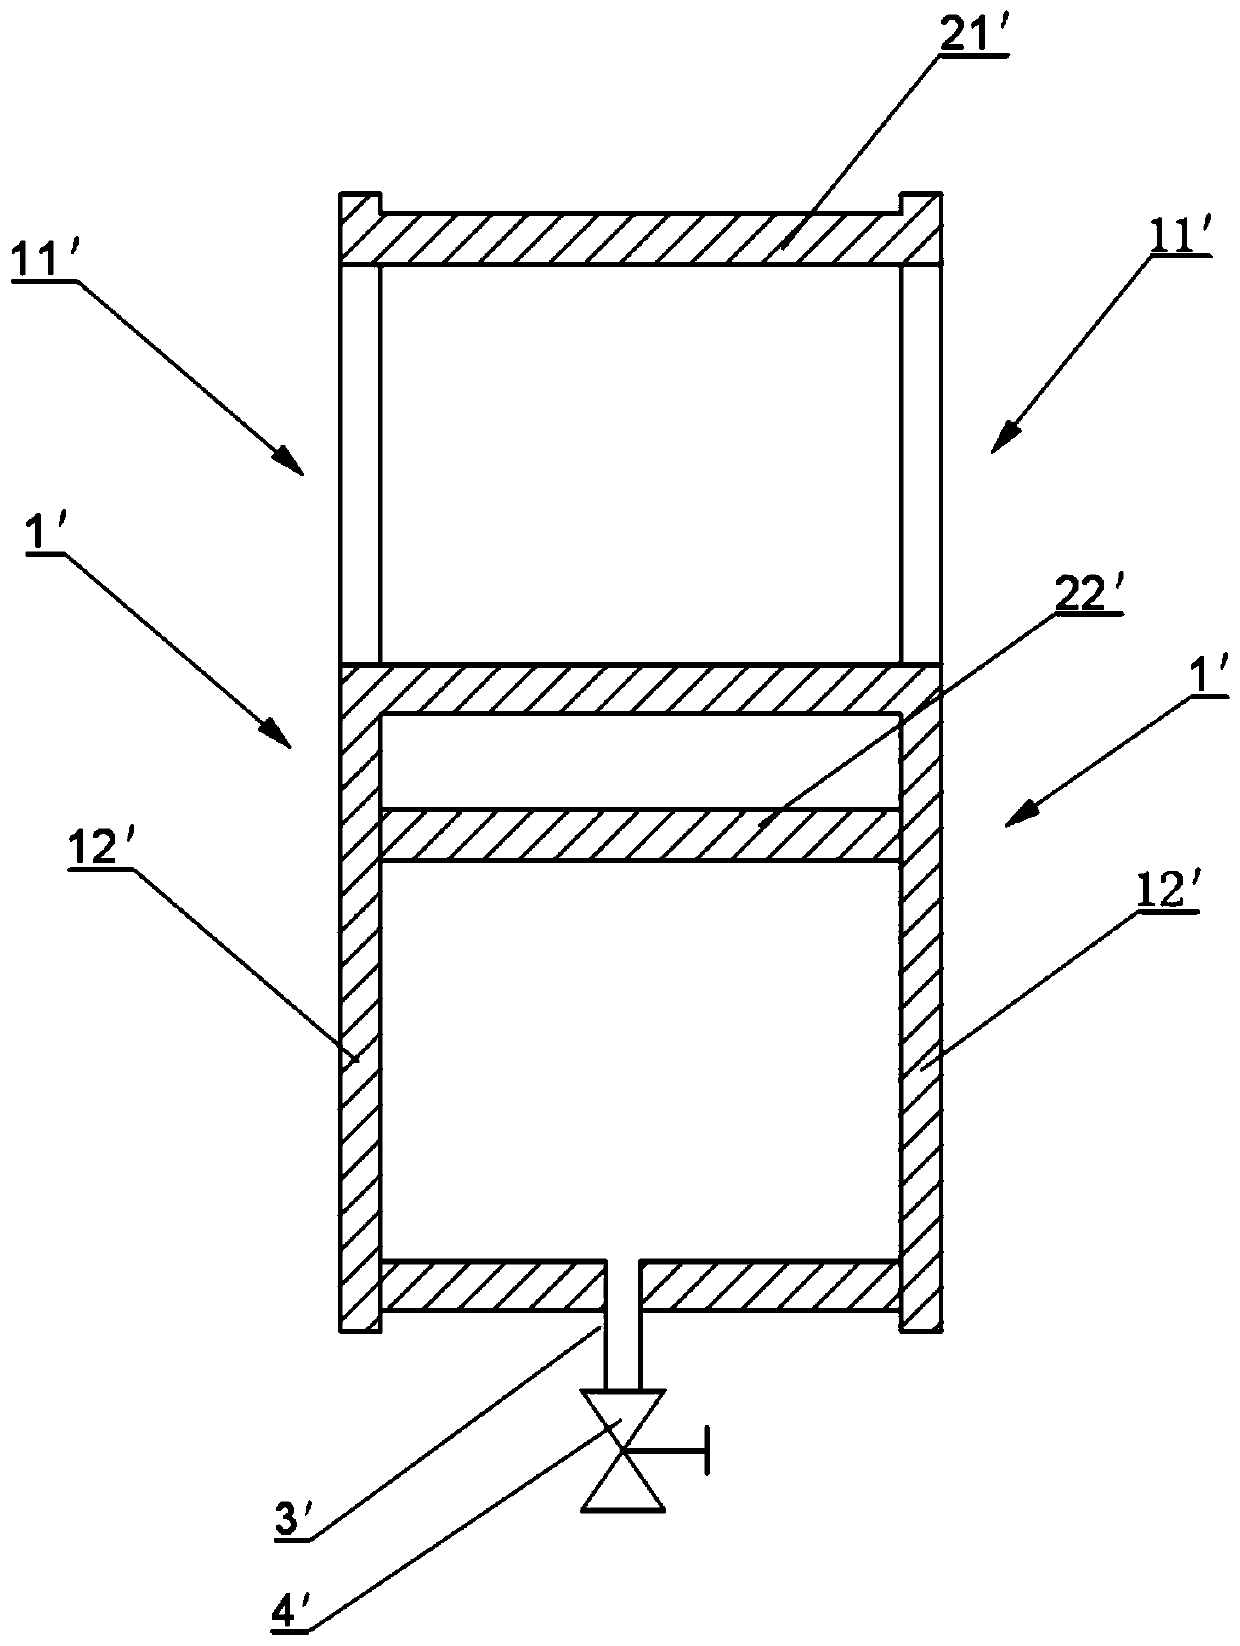 Isolating device and ship